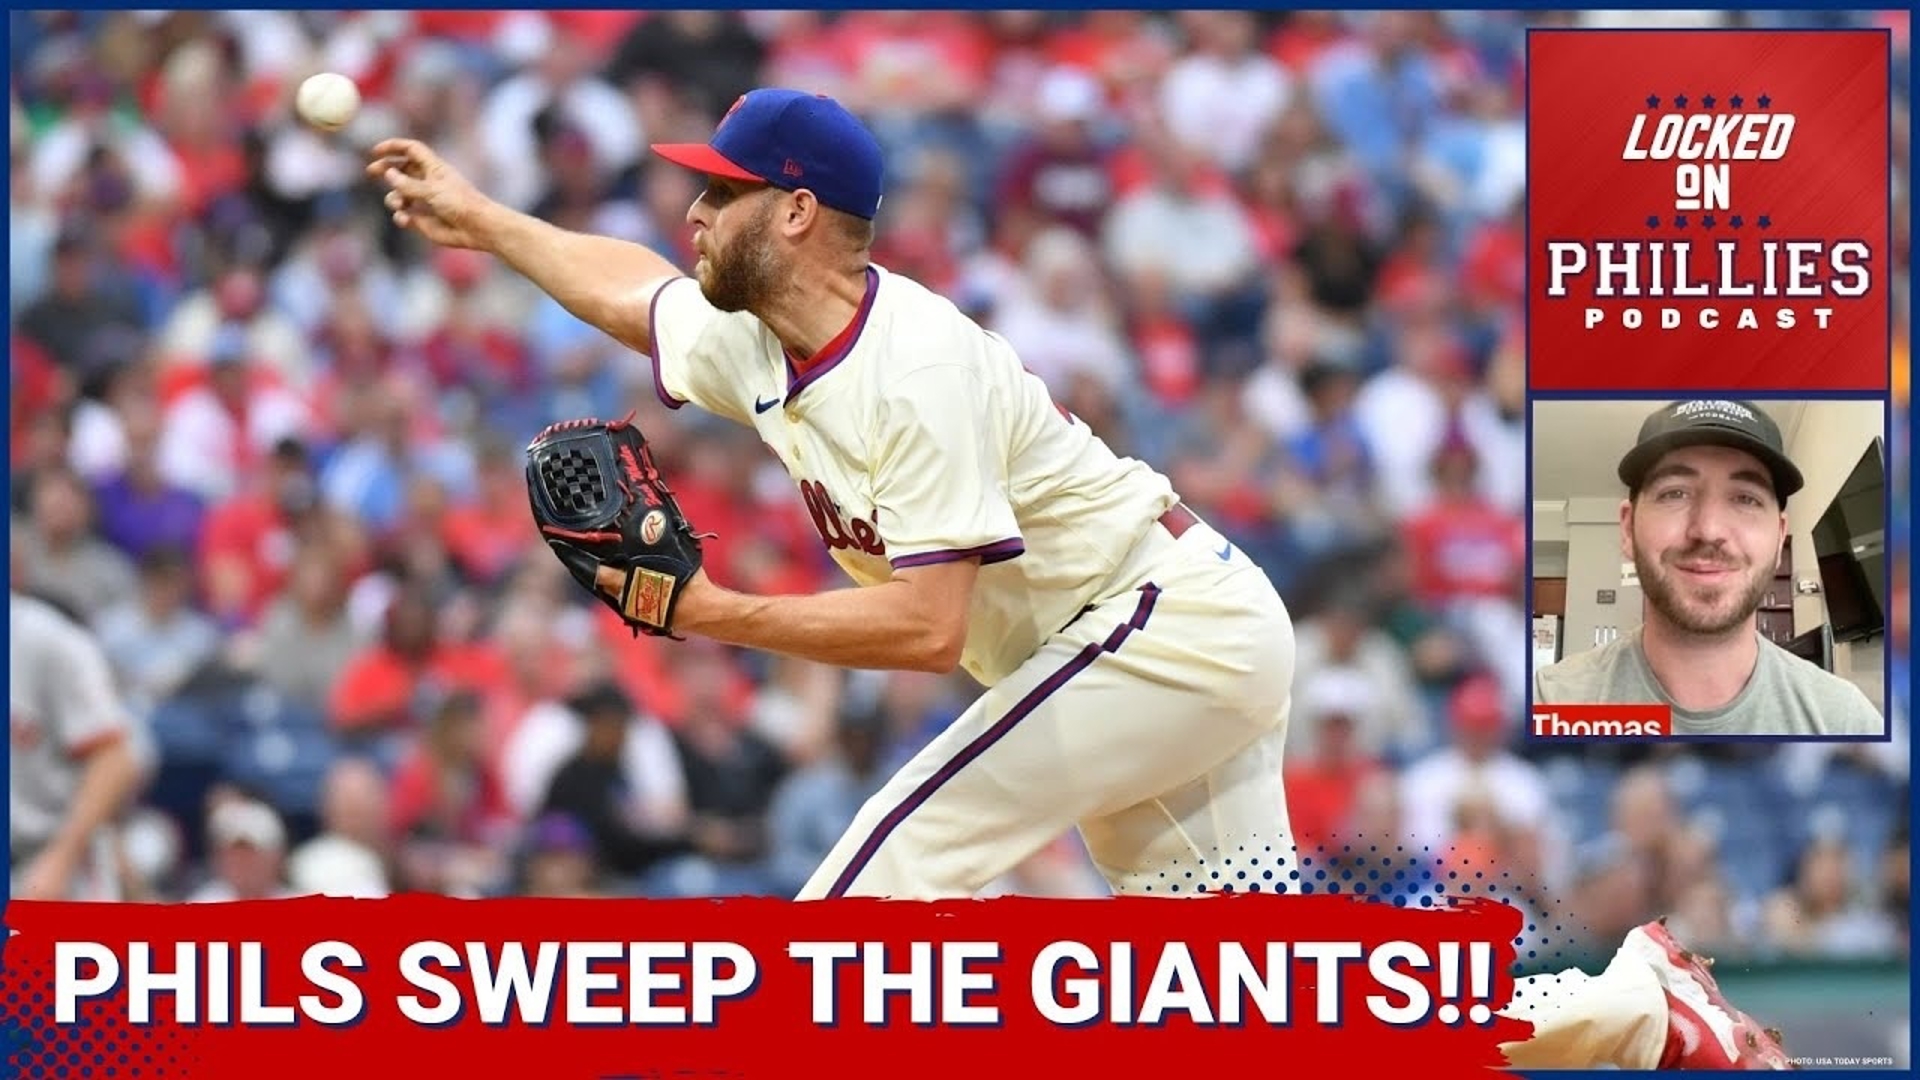 In today's episode, the Philadelphia Phillies have won once again, completing the 4 game sweep of the San Francisco Giants!